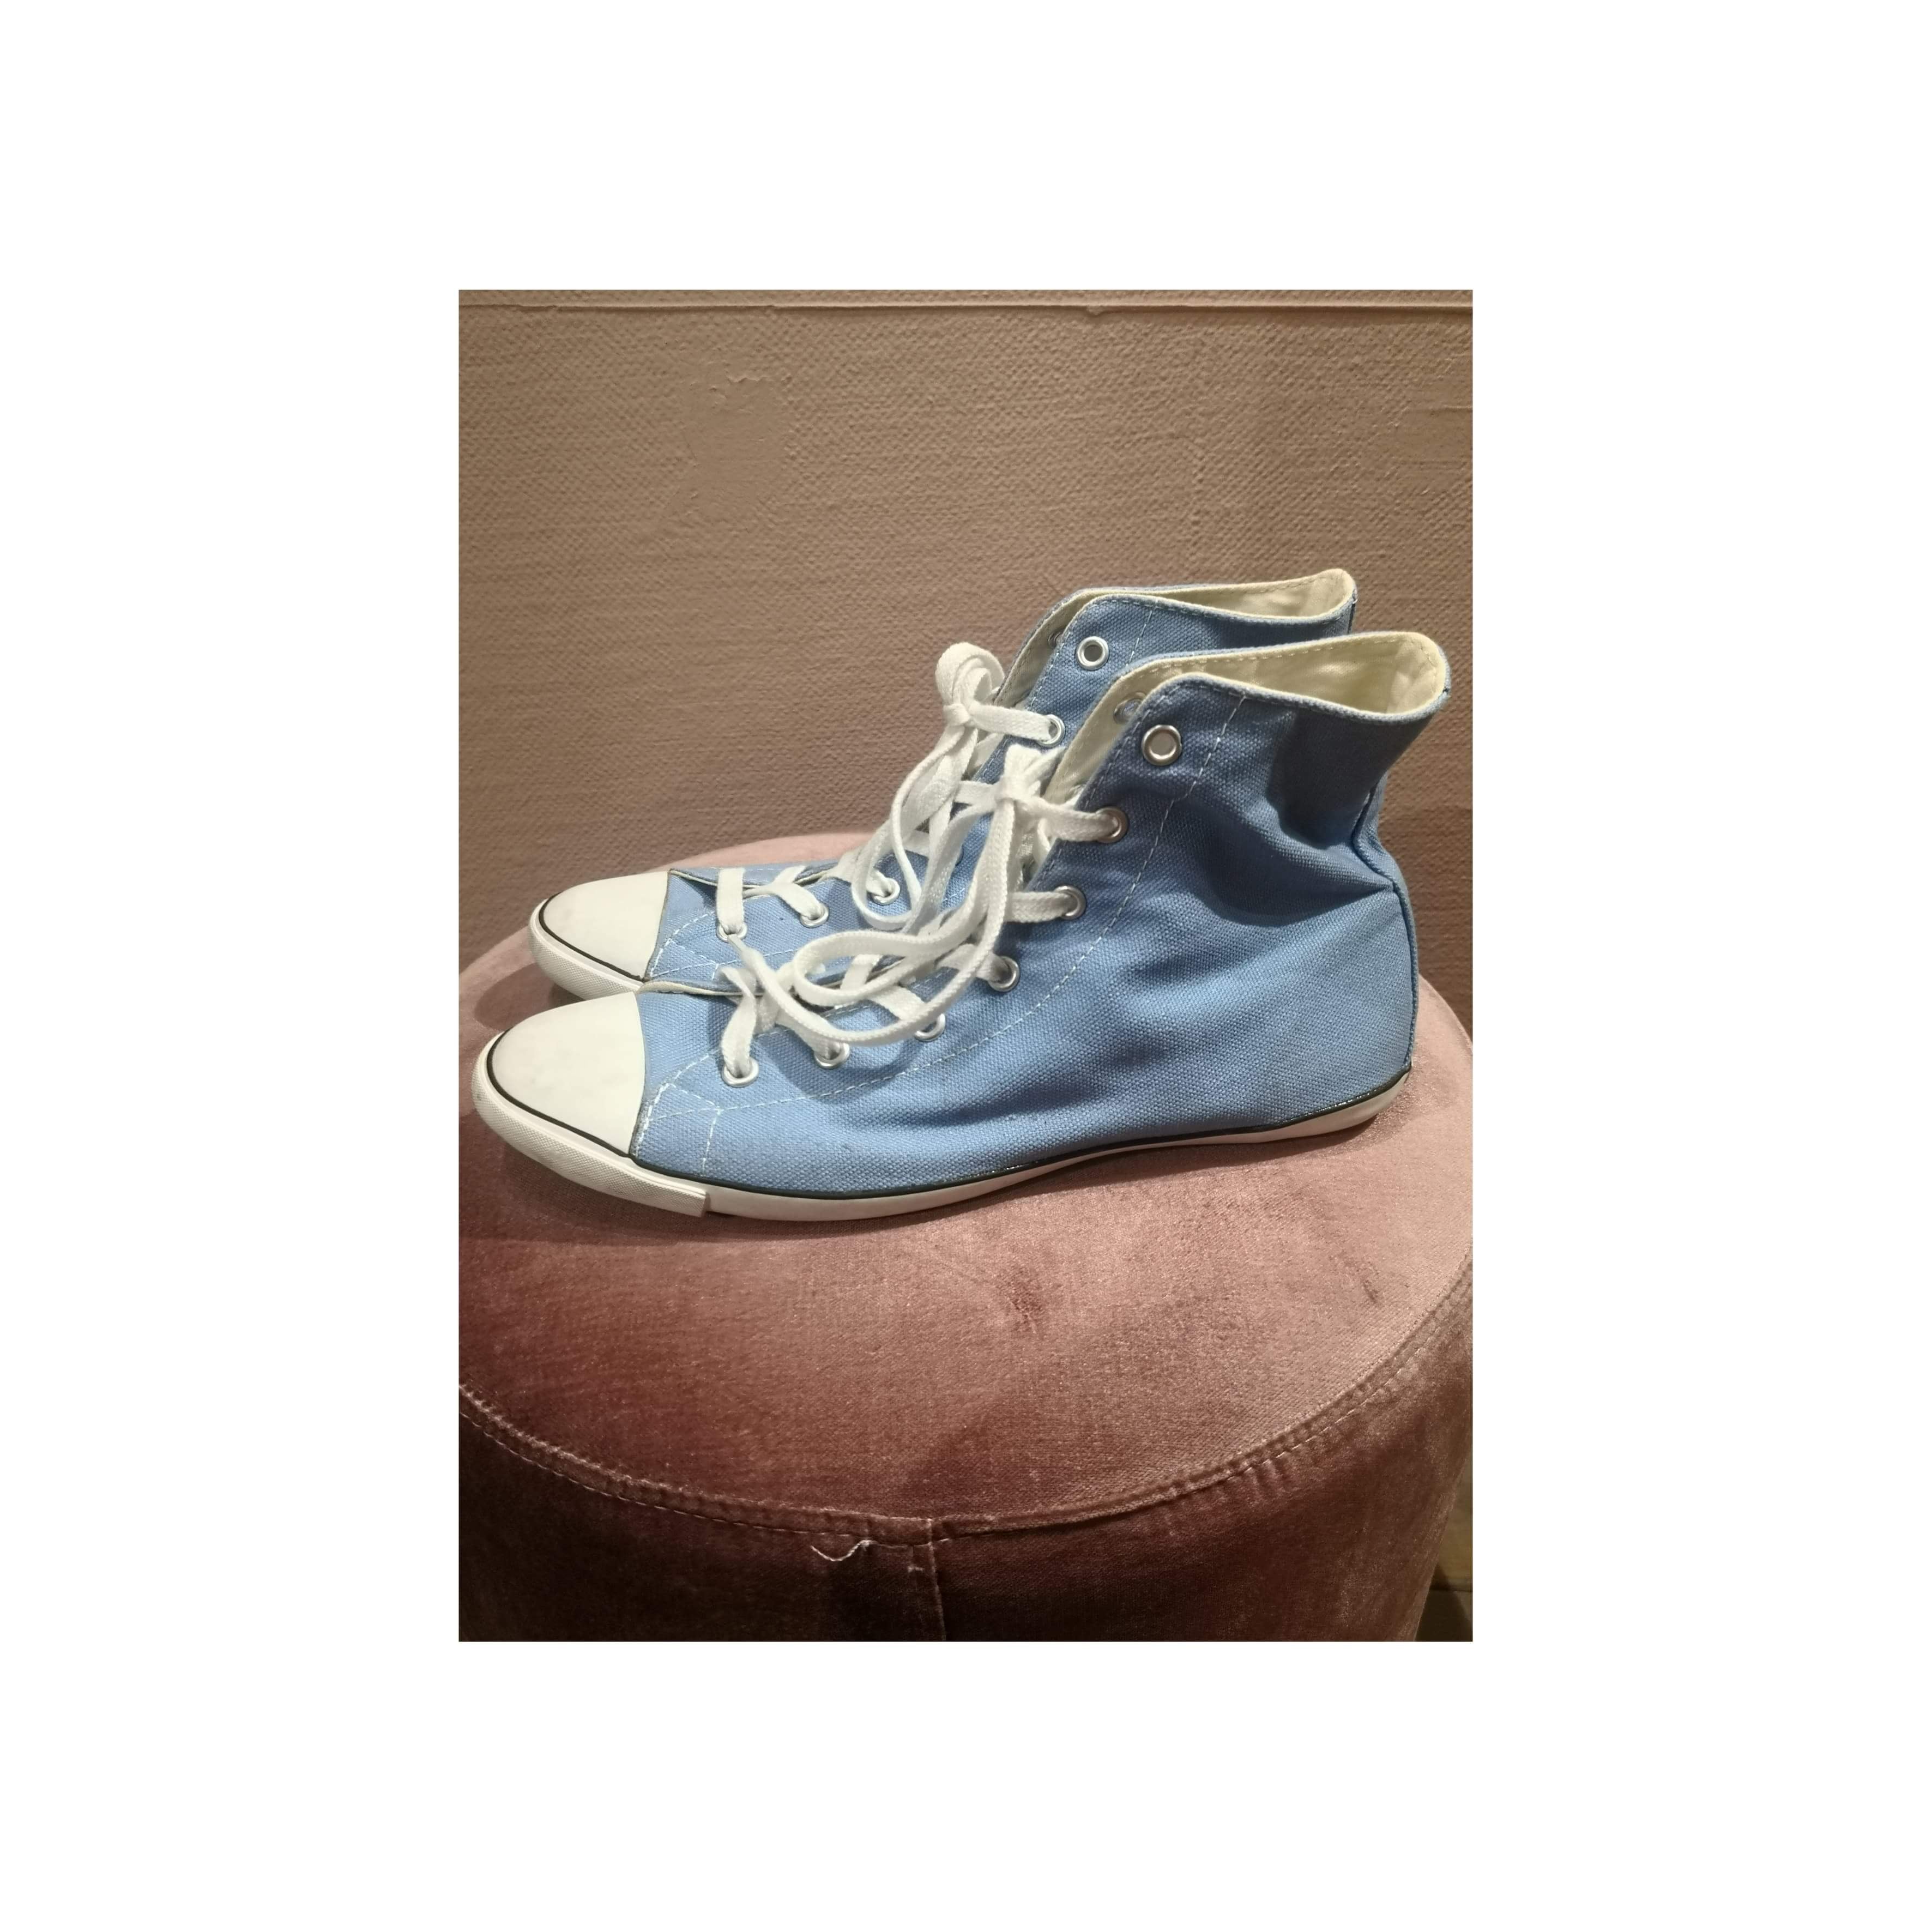 Converse - Sneakers - Size: 40